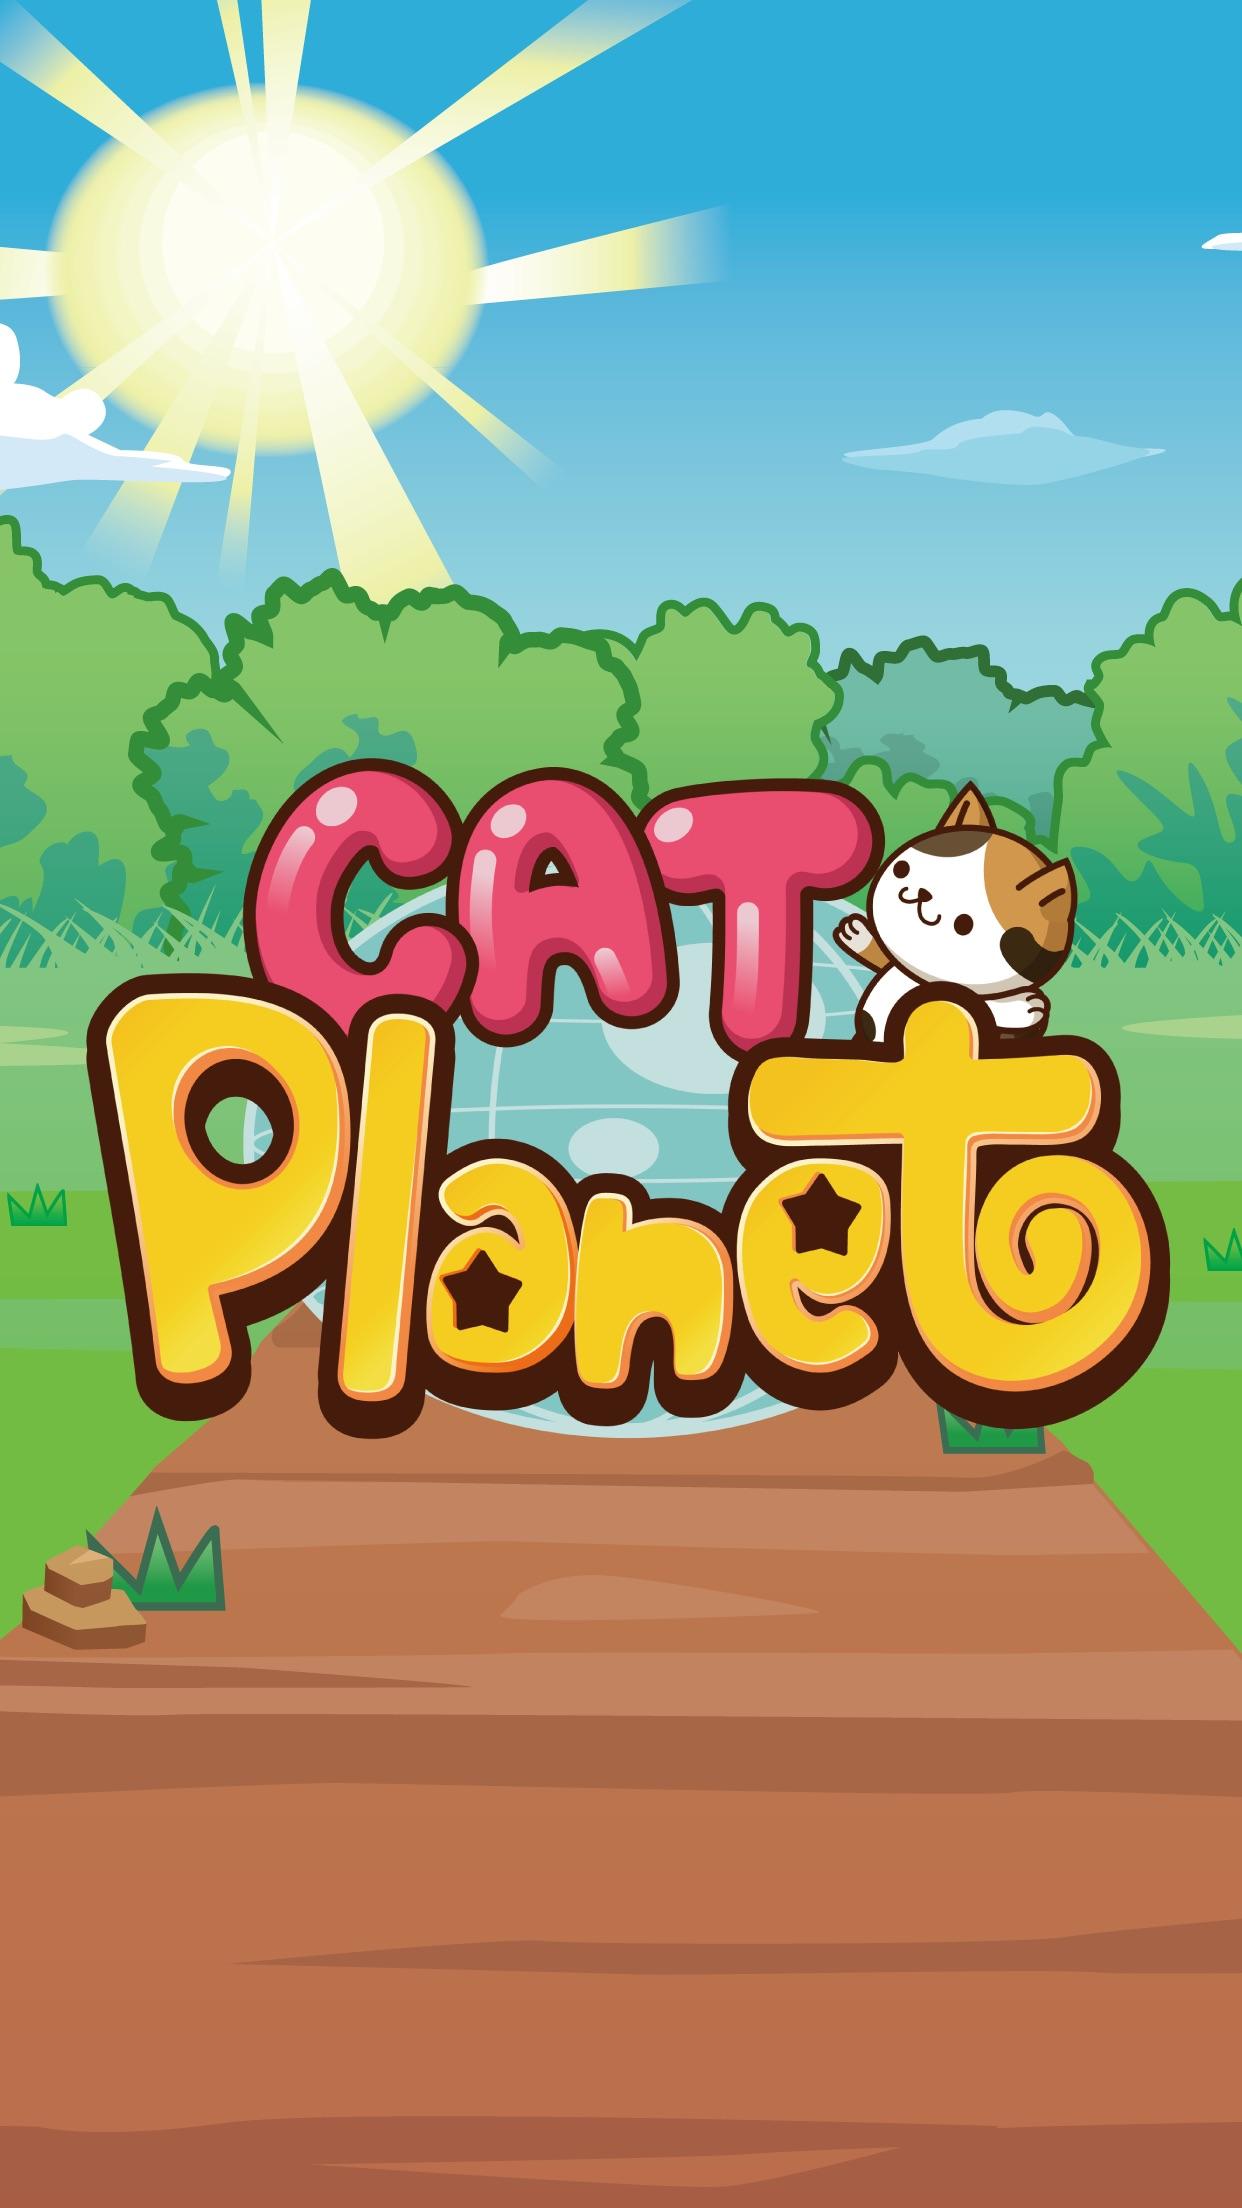 Cat Planet -Planet of the cats截图4